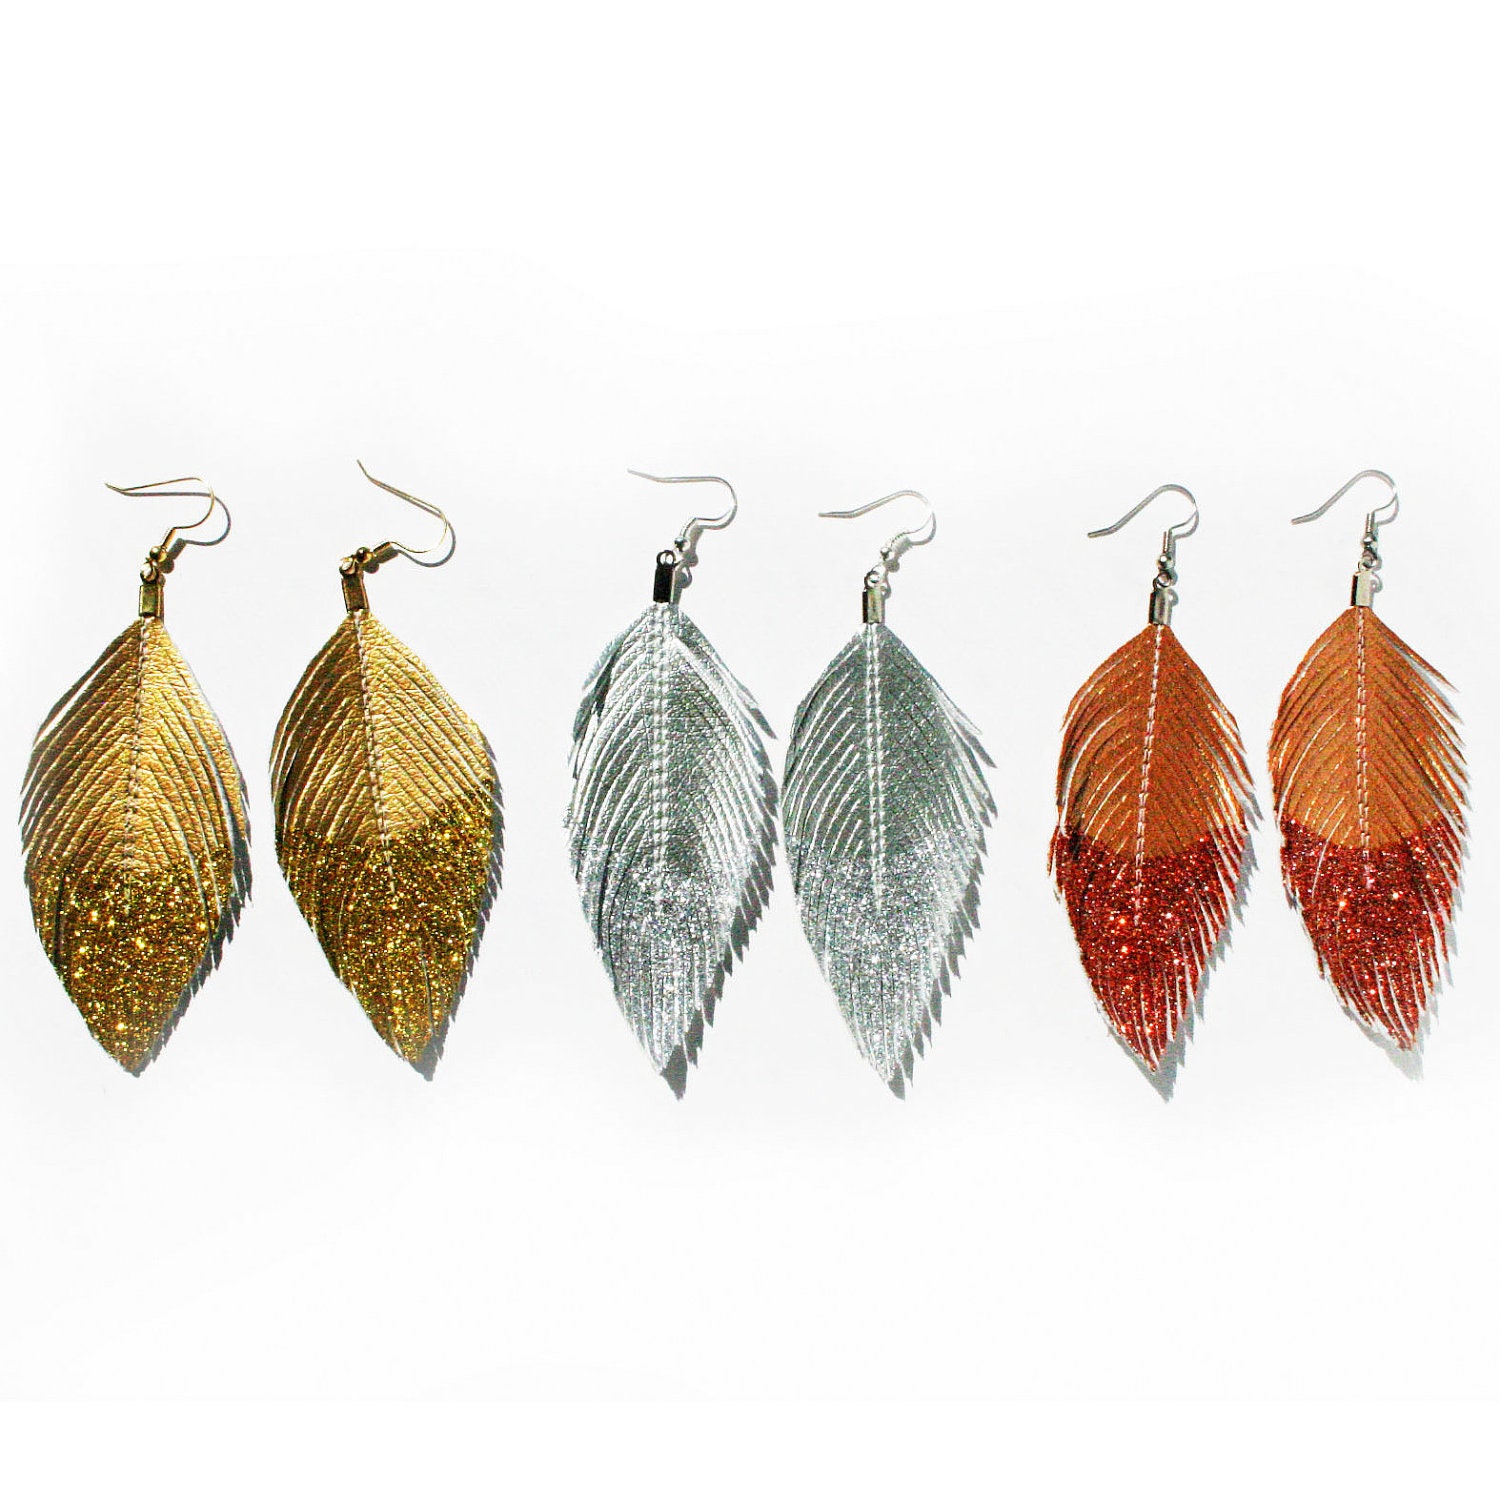 Dangle Earrings Metallic Glitter Dipped - Faux Leather Feather Earrings Accessories - Surgical Steel Available - FREE US SHIP